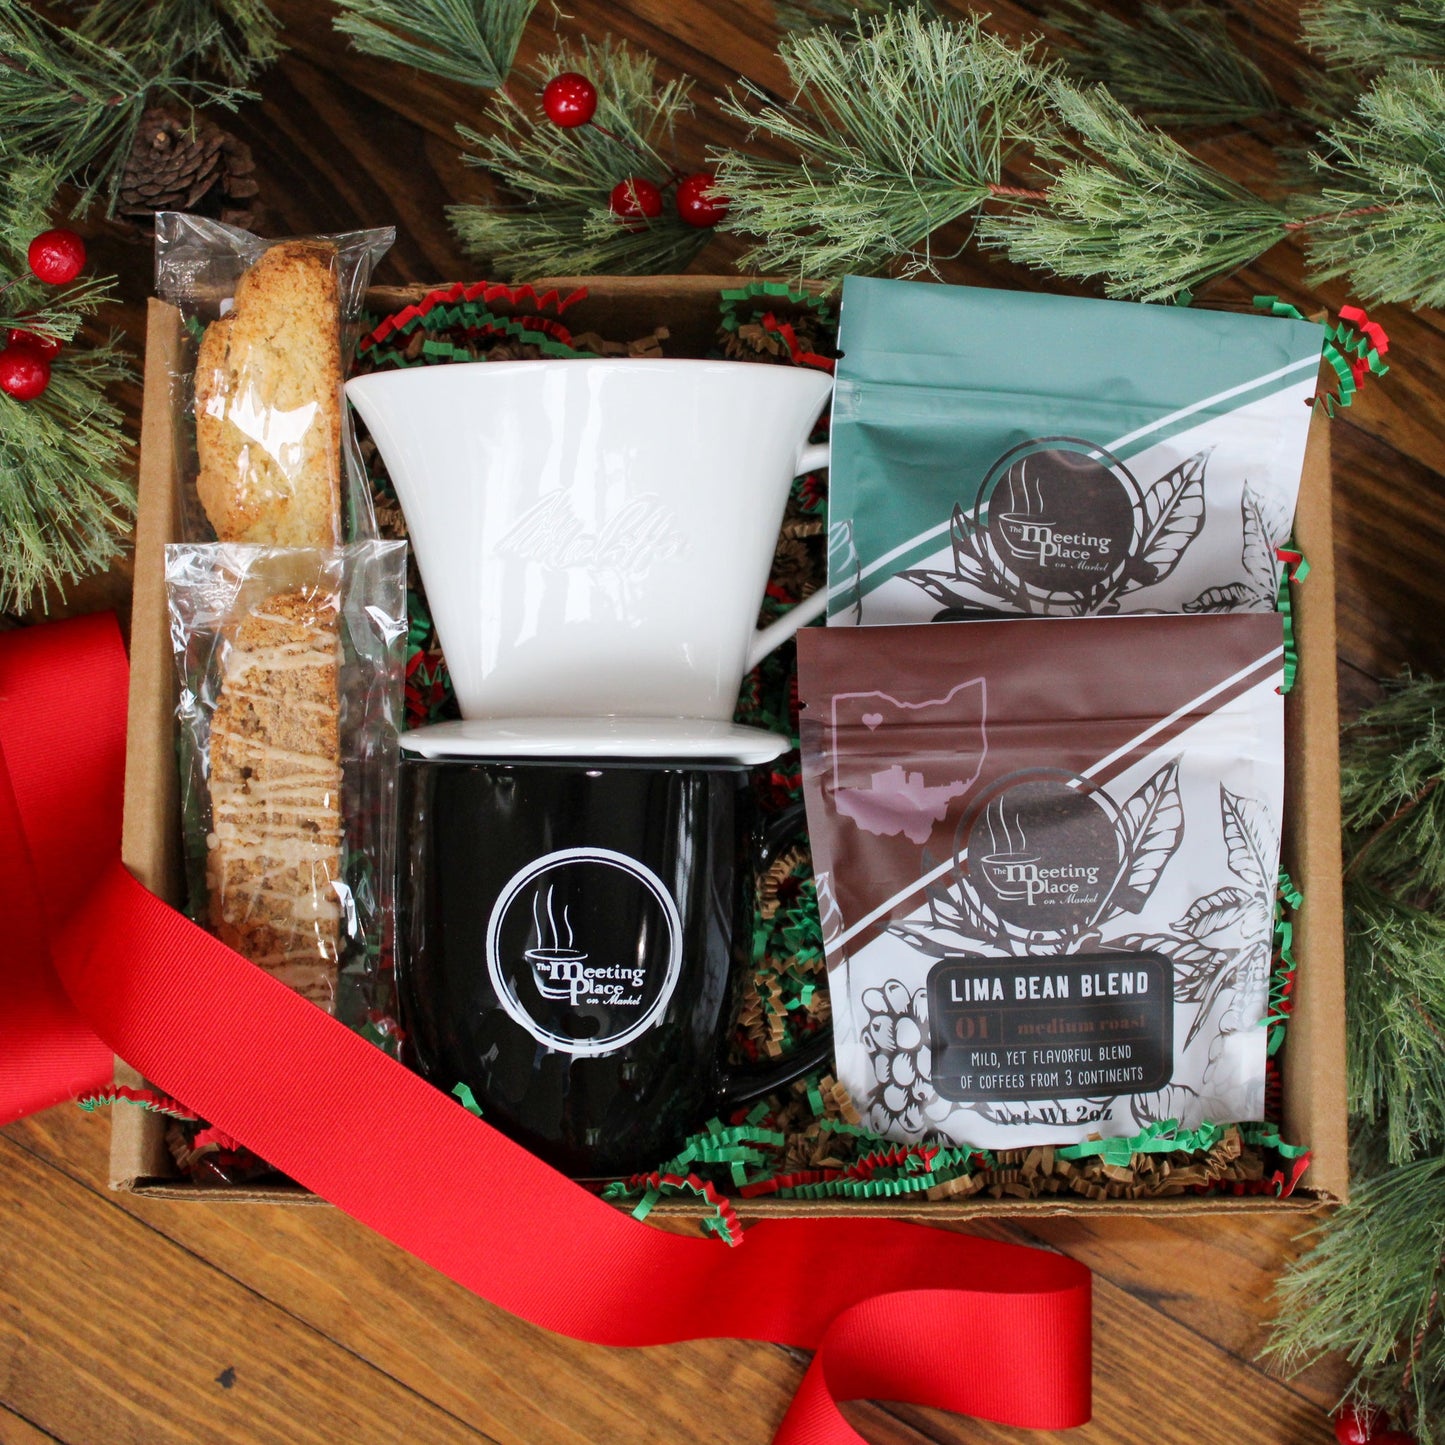 Coffee Lovers Gift Basket - A Personal Gift